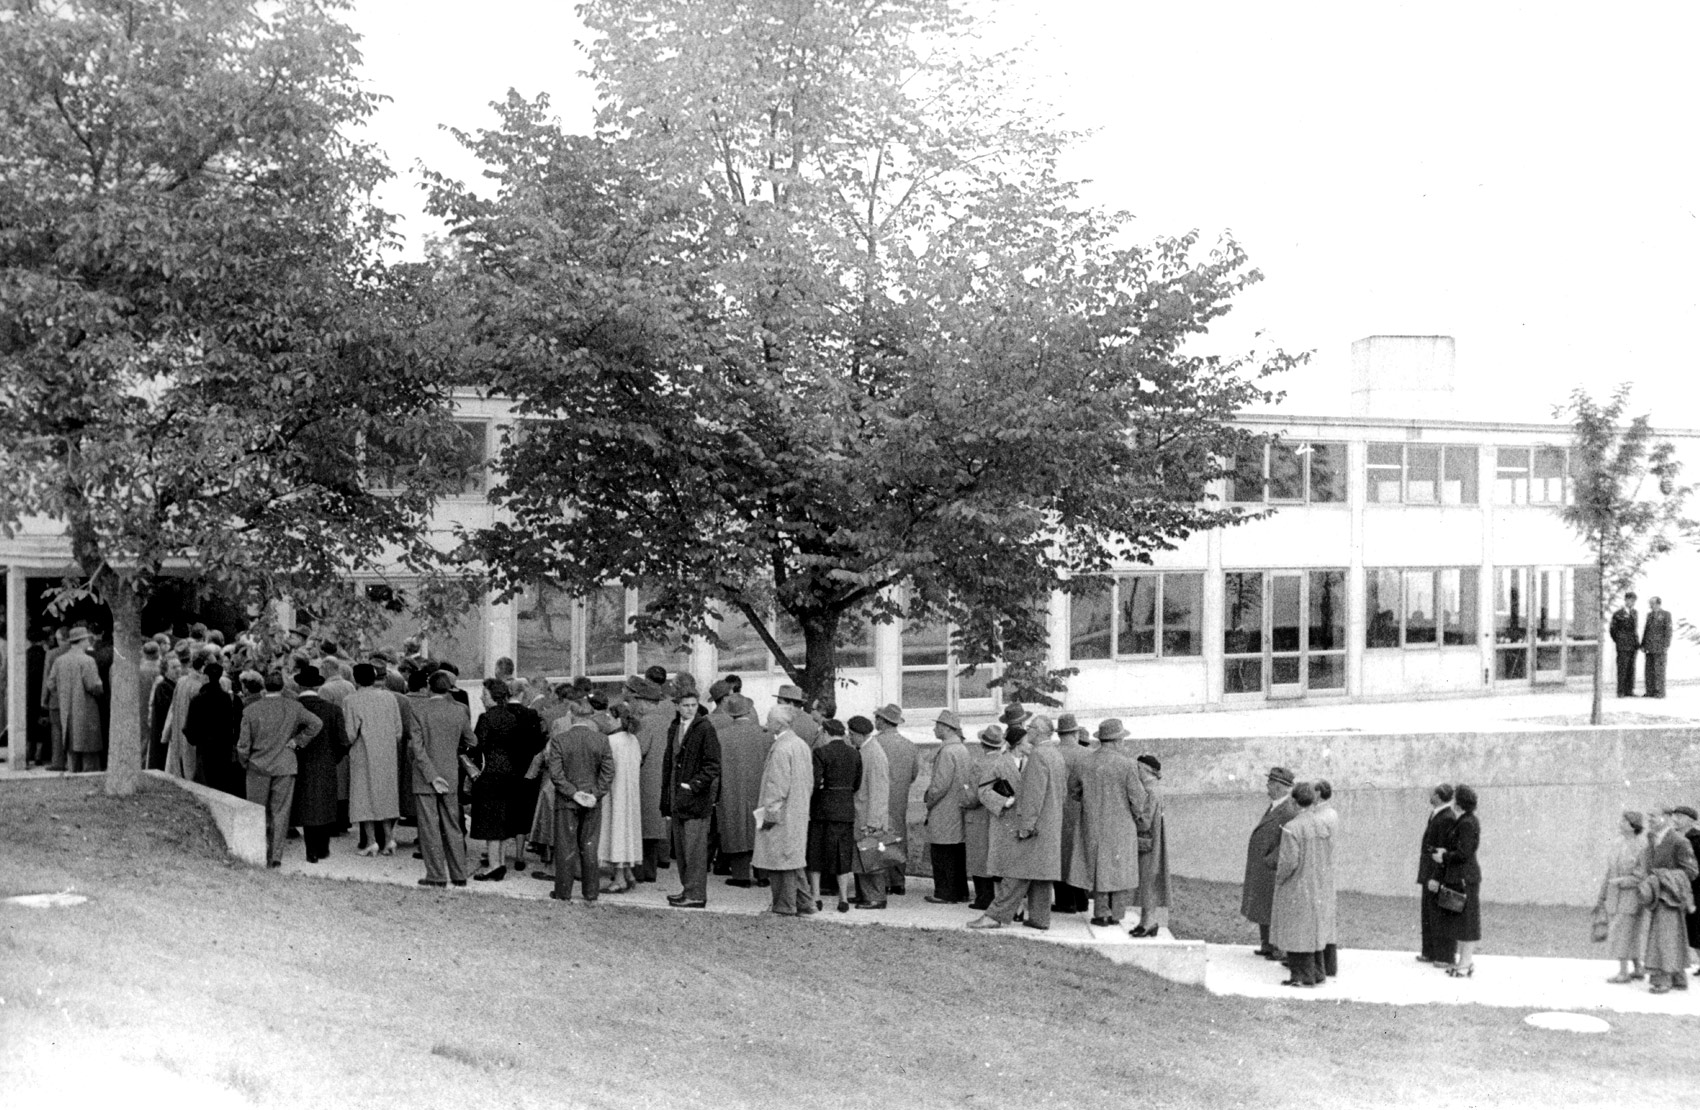 Visitors standing in line at the opening of the Ulm School of Design, 2 October 1955